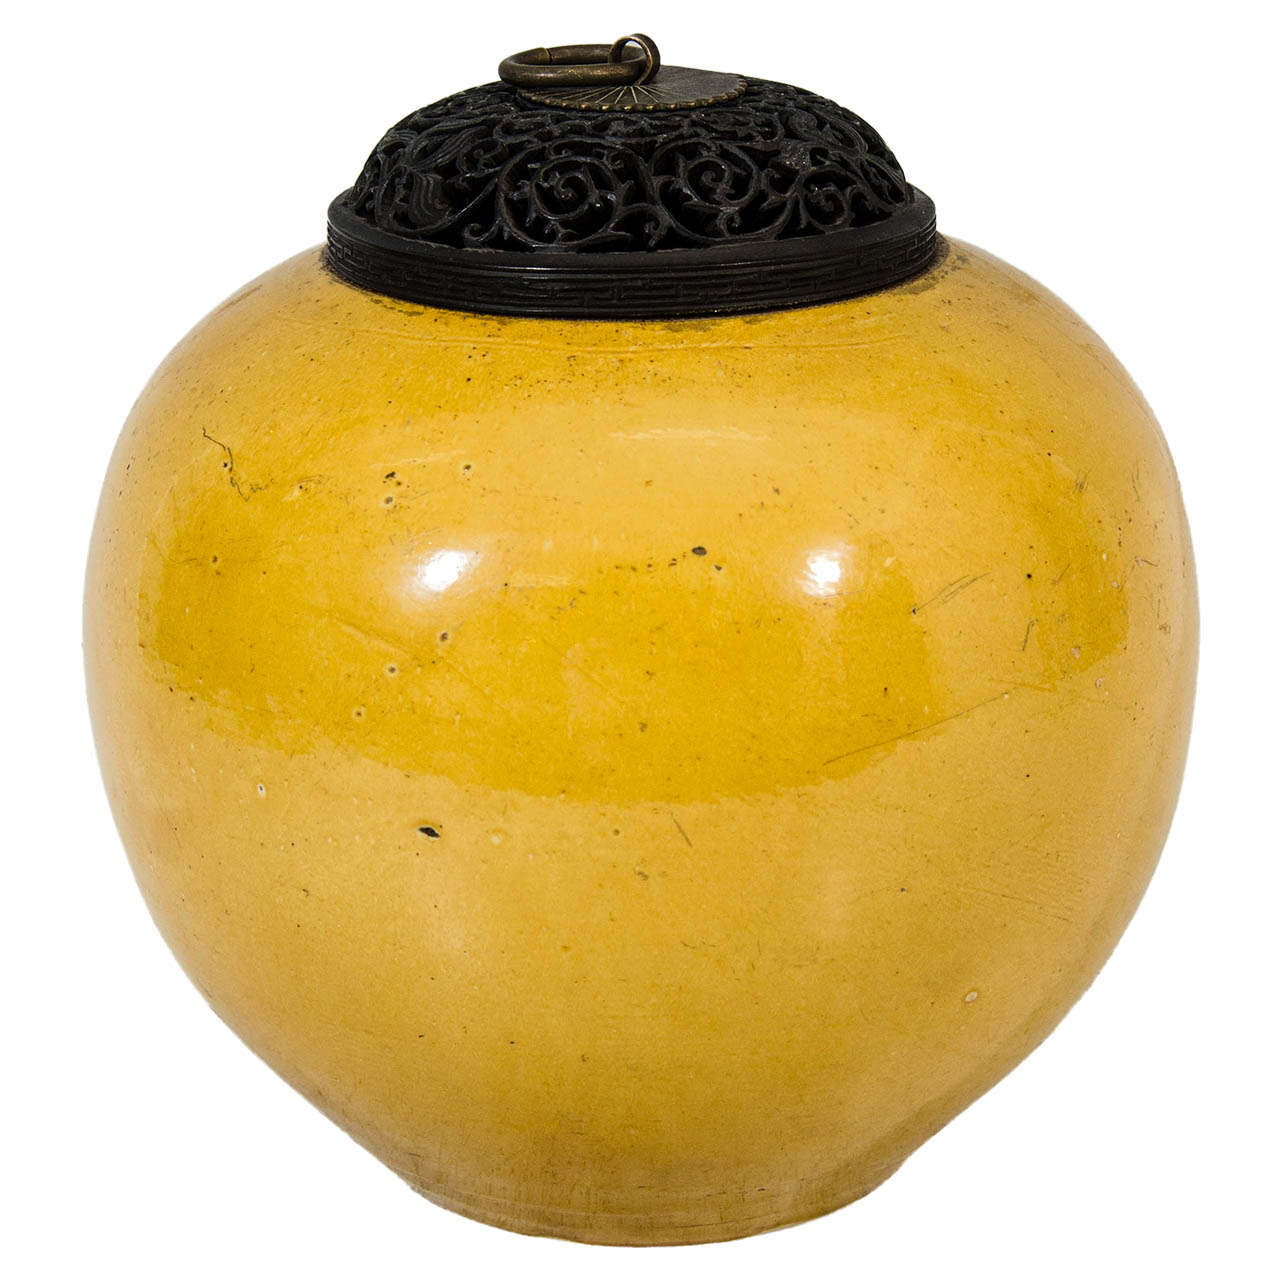 A  Late 17th or Early 18th Century Kangxi Porcelain Tea Jar in Yellow Enamel